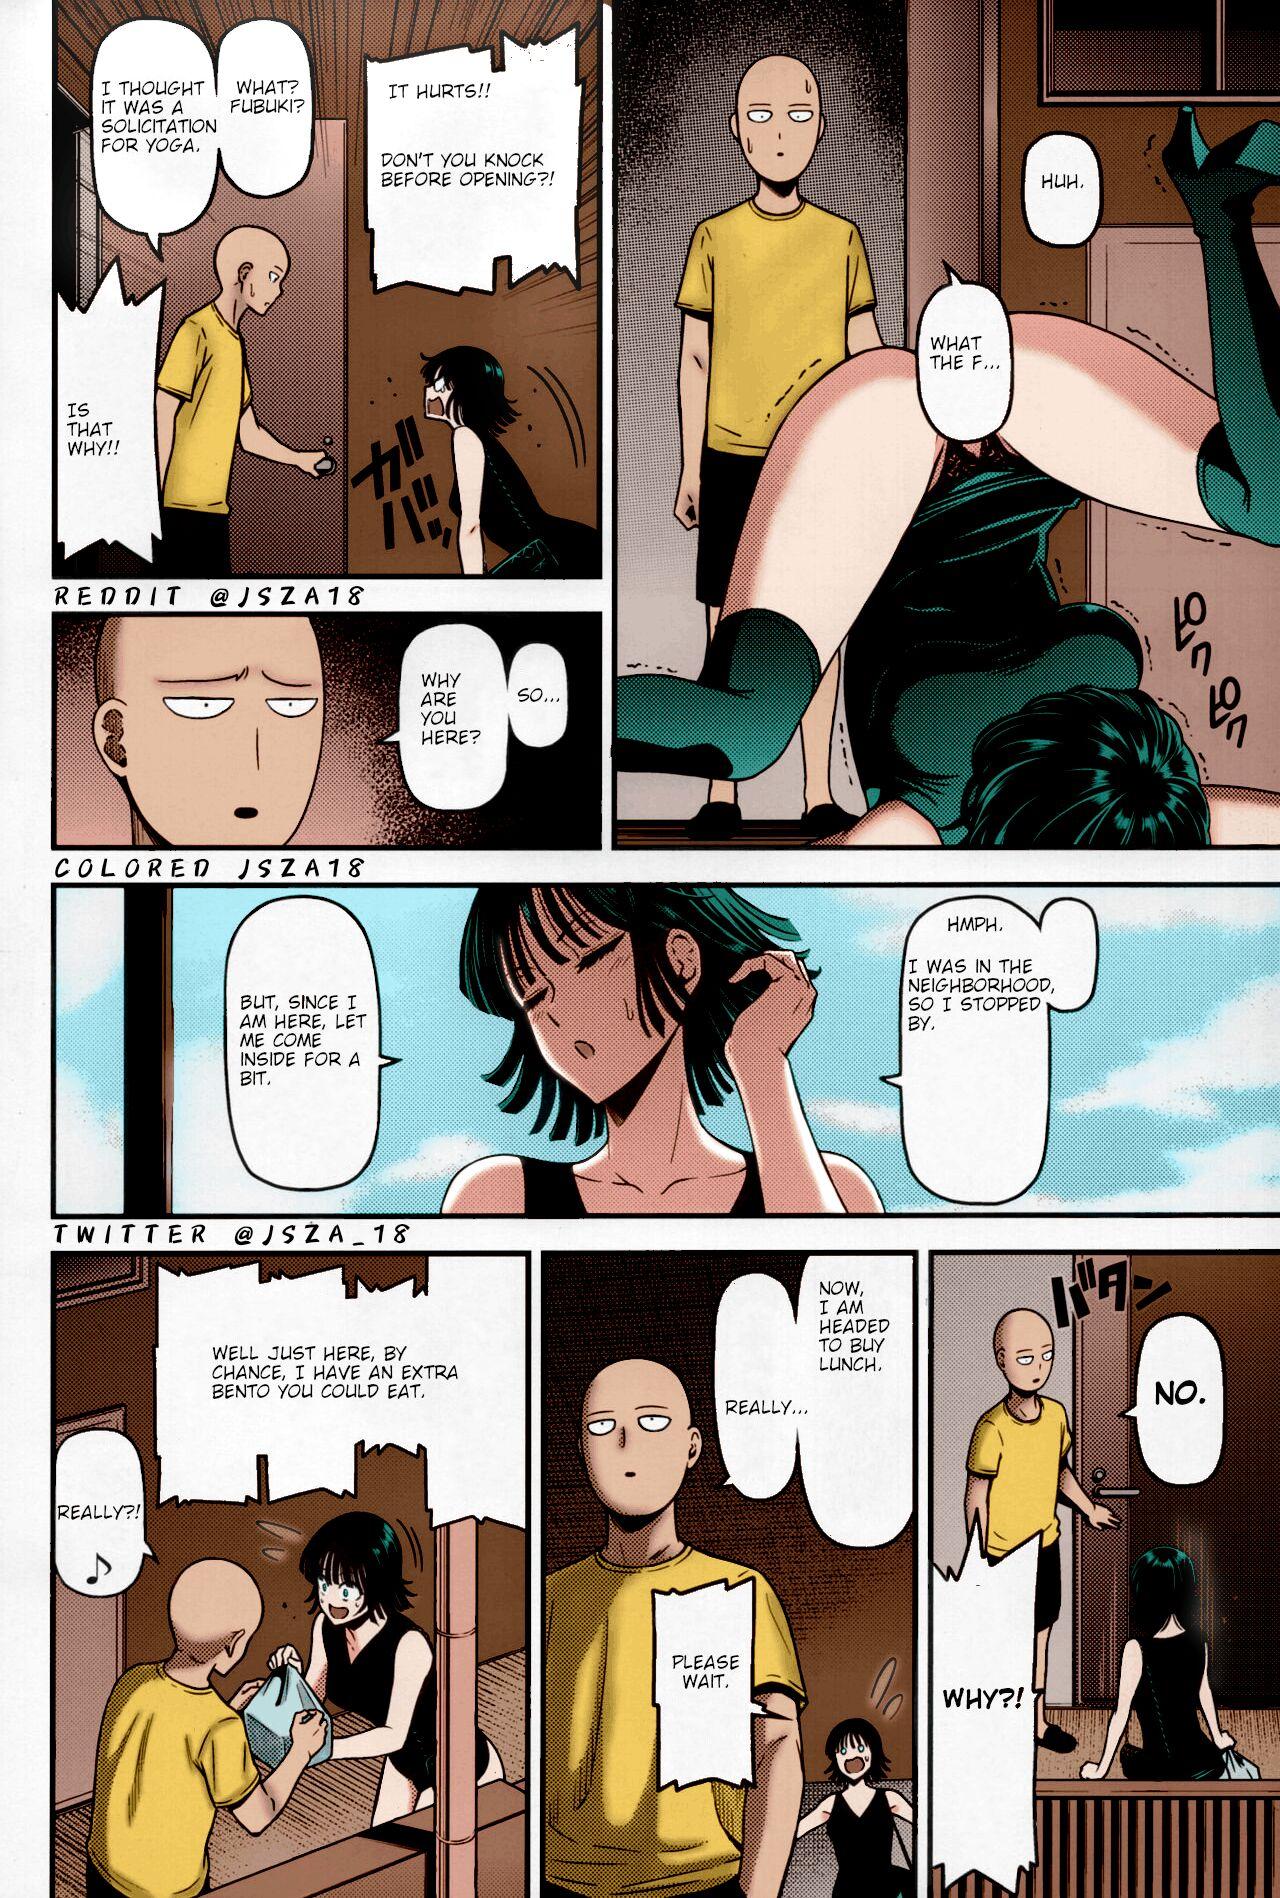 Huge Ass ONE-HURRICANE 6 - One punch man Messy - Page 3